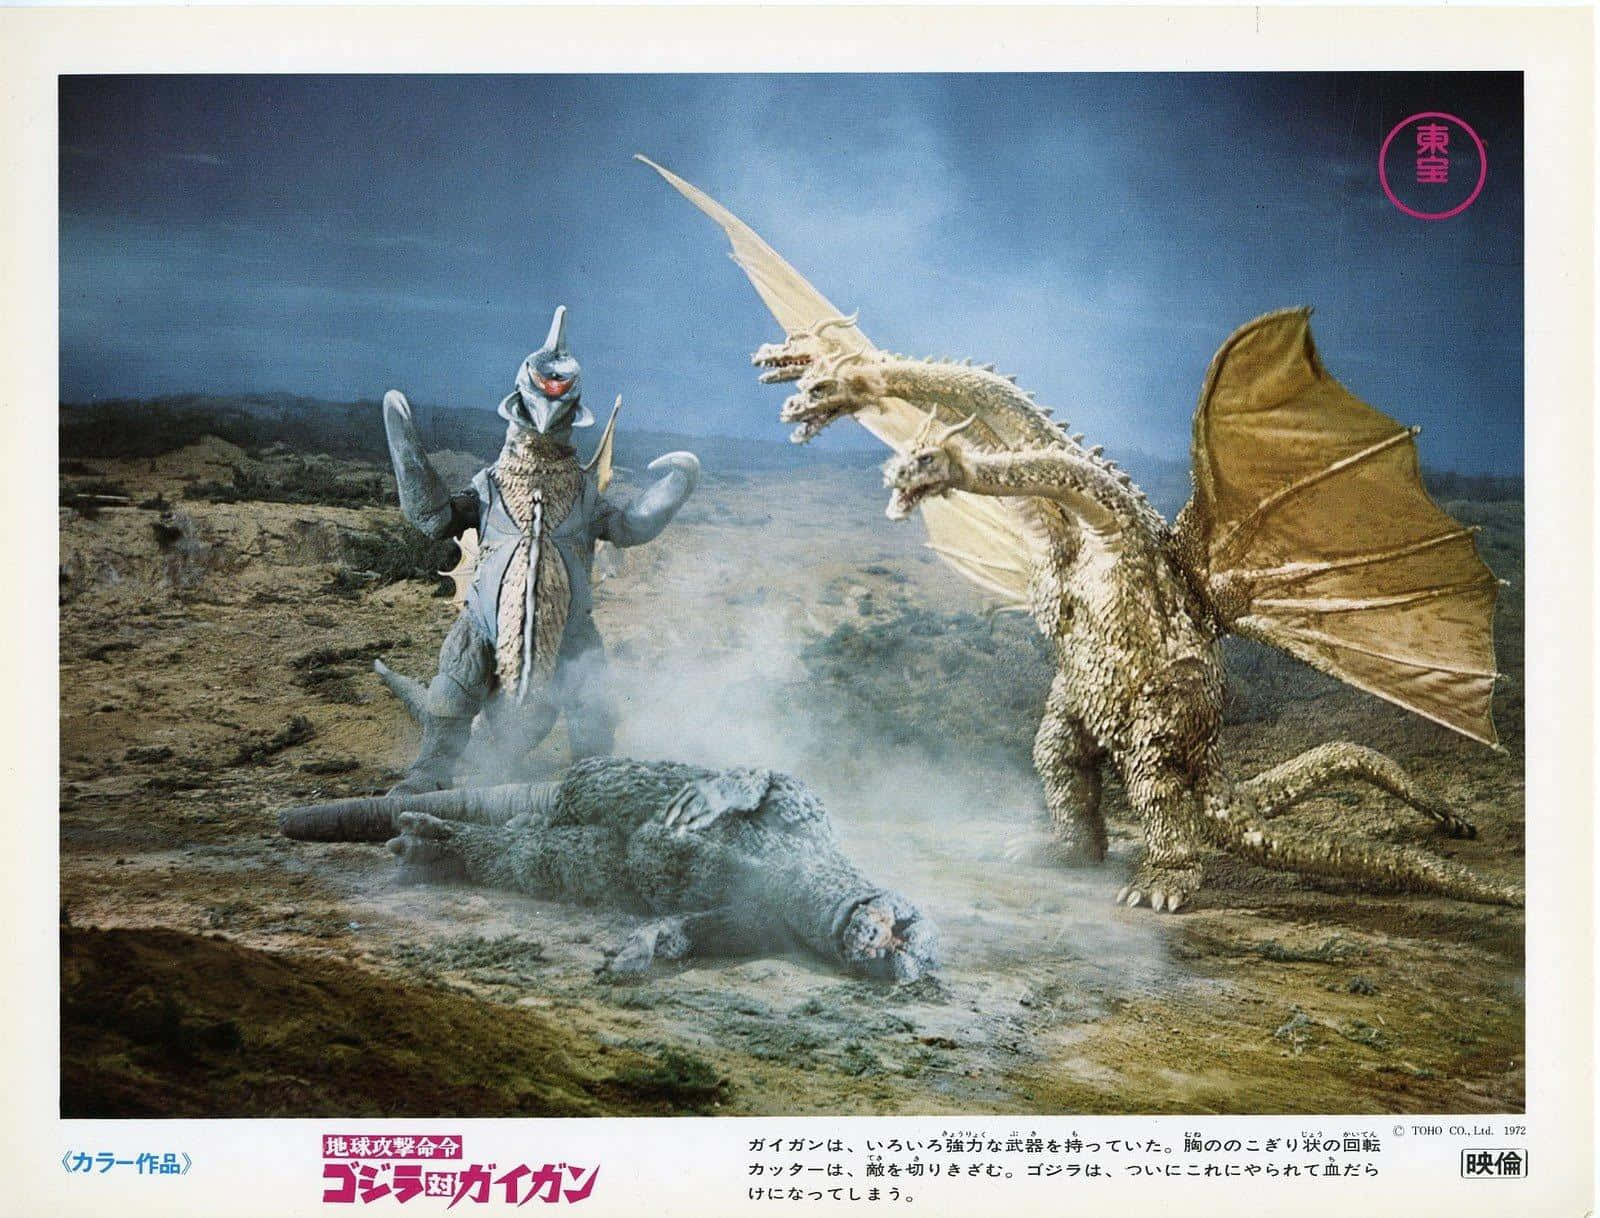 Powerful Gigan ready for action in an epic battle scene Wallpaper